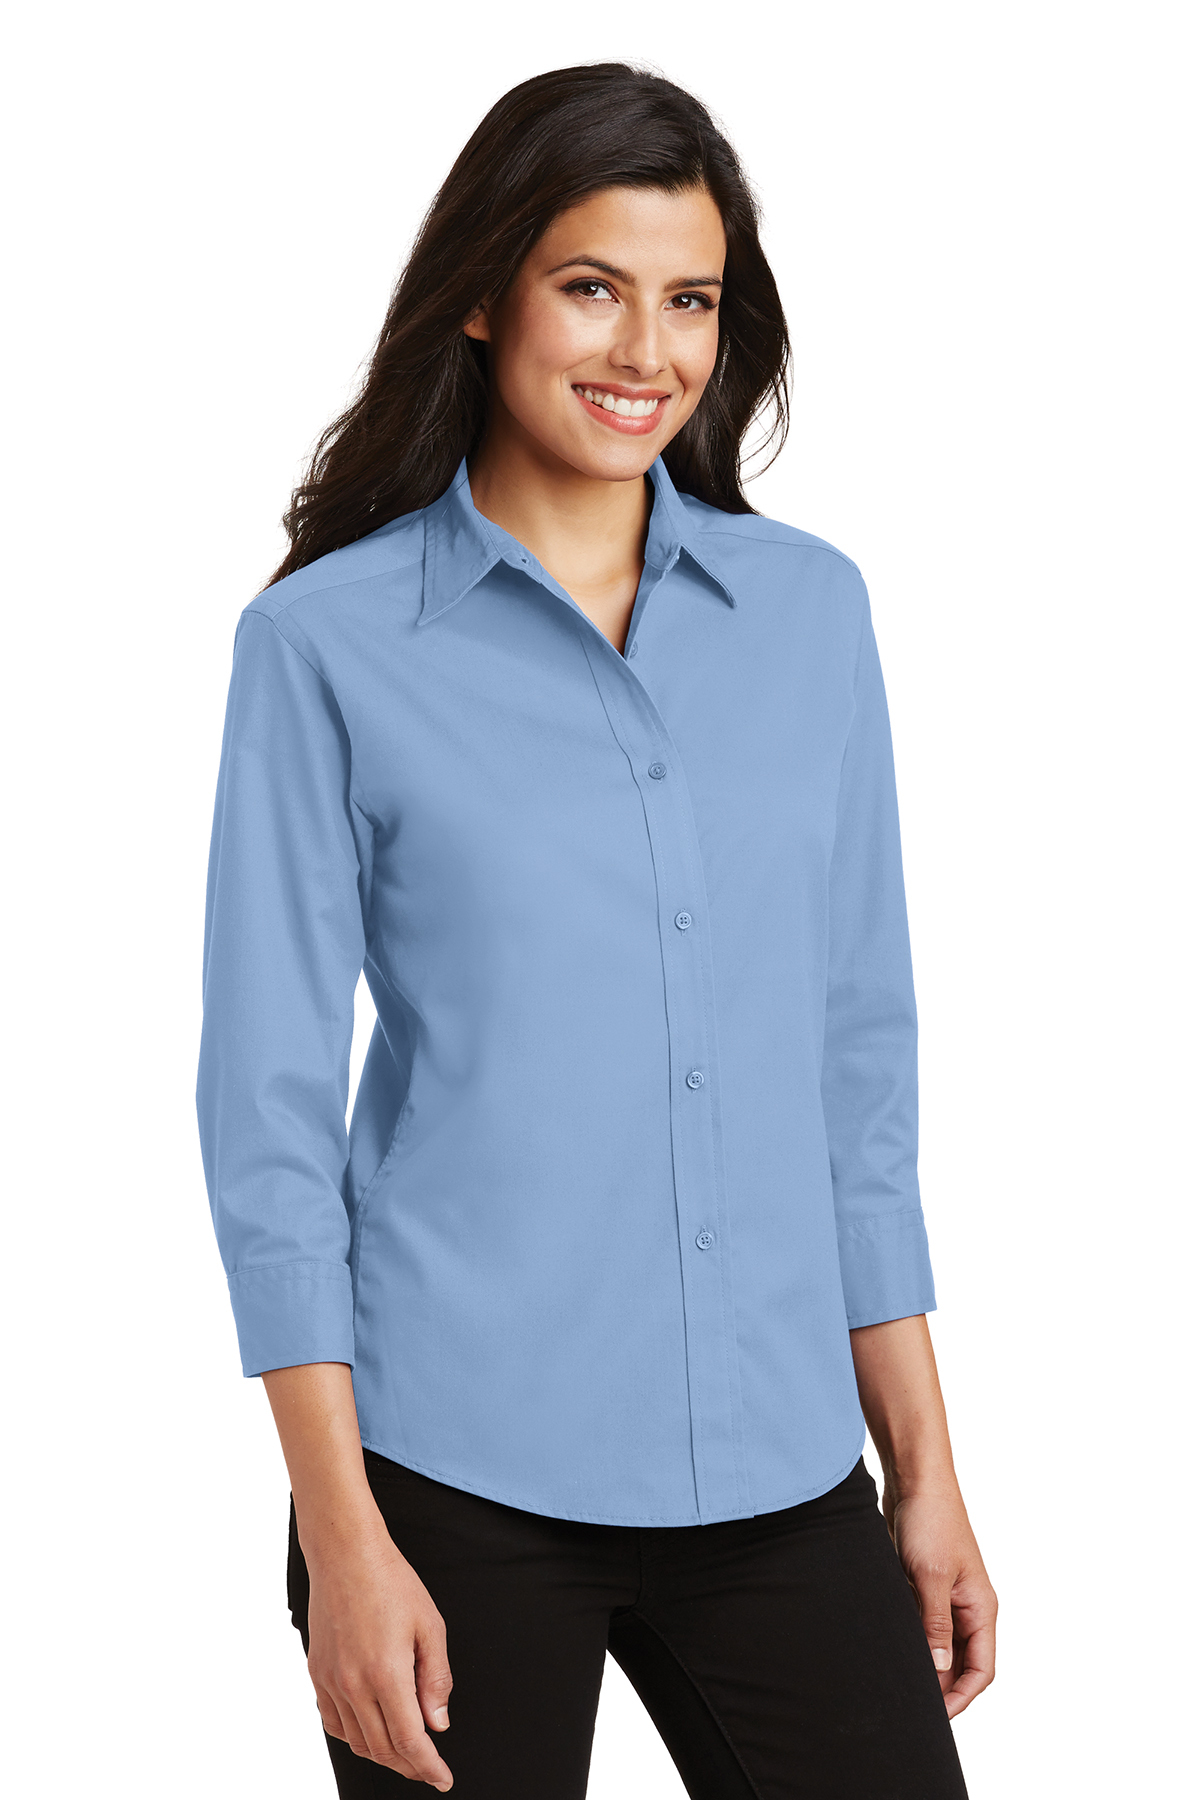 Port Authority Ladies 3/4-Sleeve Easy Care Shirt | Product | Port